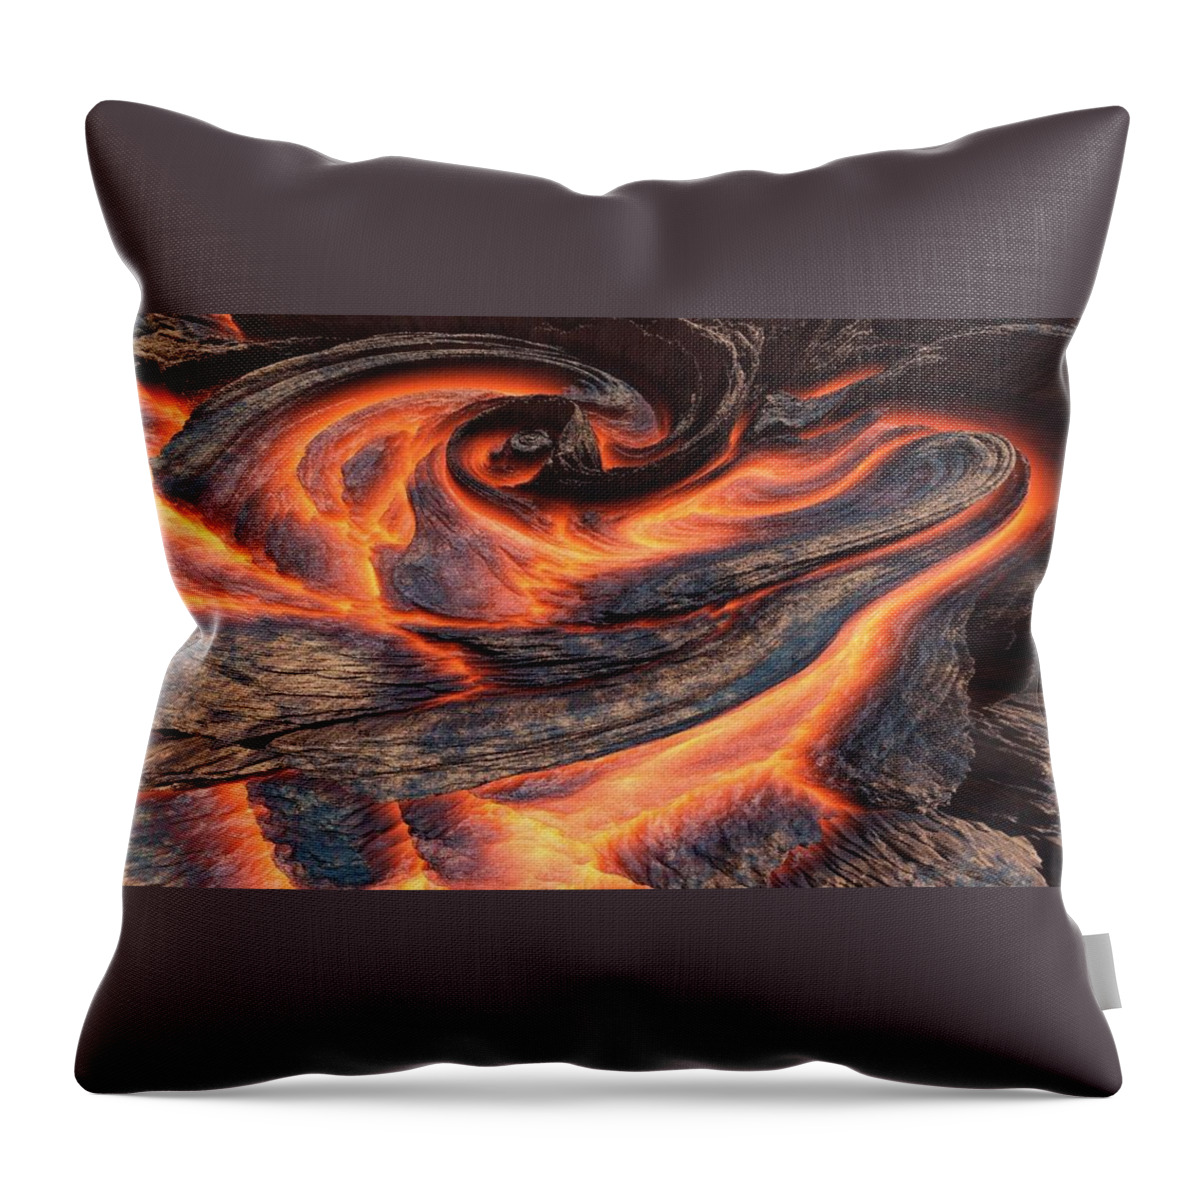 Volcano Throw Pillow featuring the digital art Volcano by Maye Loeser